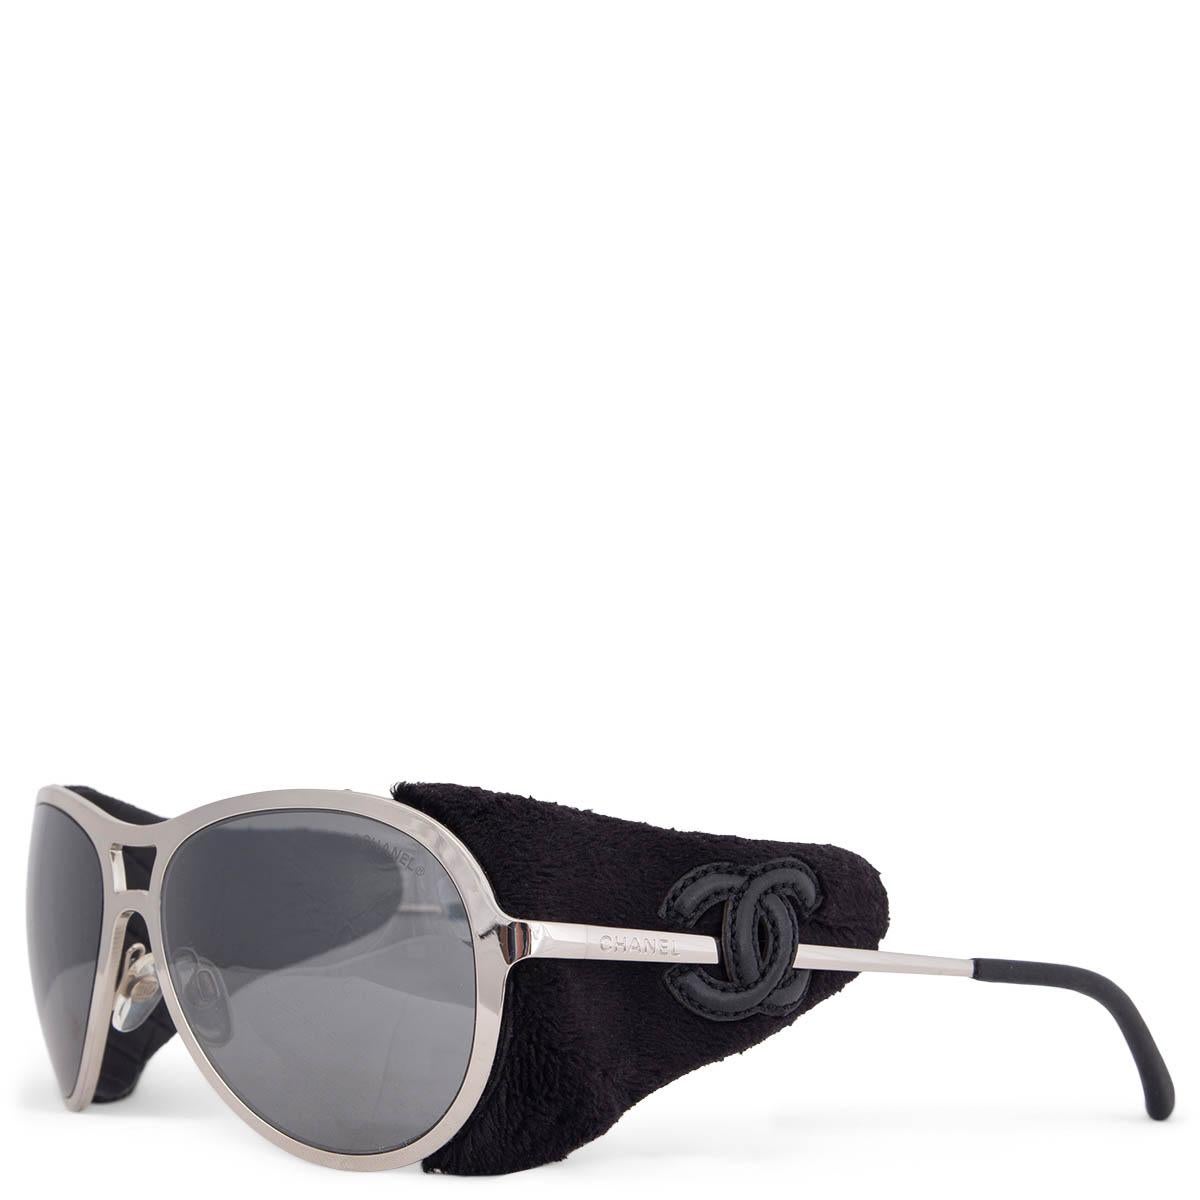 100% authentic Chanel Coco Neige side-shield Sunglasses made of silver-tone metal and black leather shields on the side with mirrored lenses. Have been worn and are in excellent condition. Come with case. 

Model	40852 L441 3N
Width	14.5cm